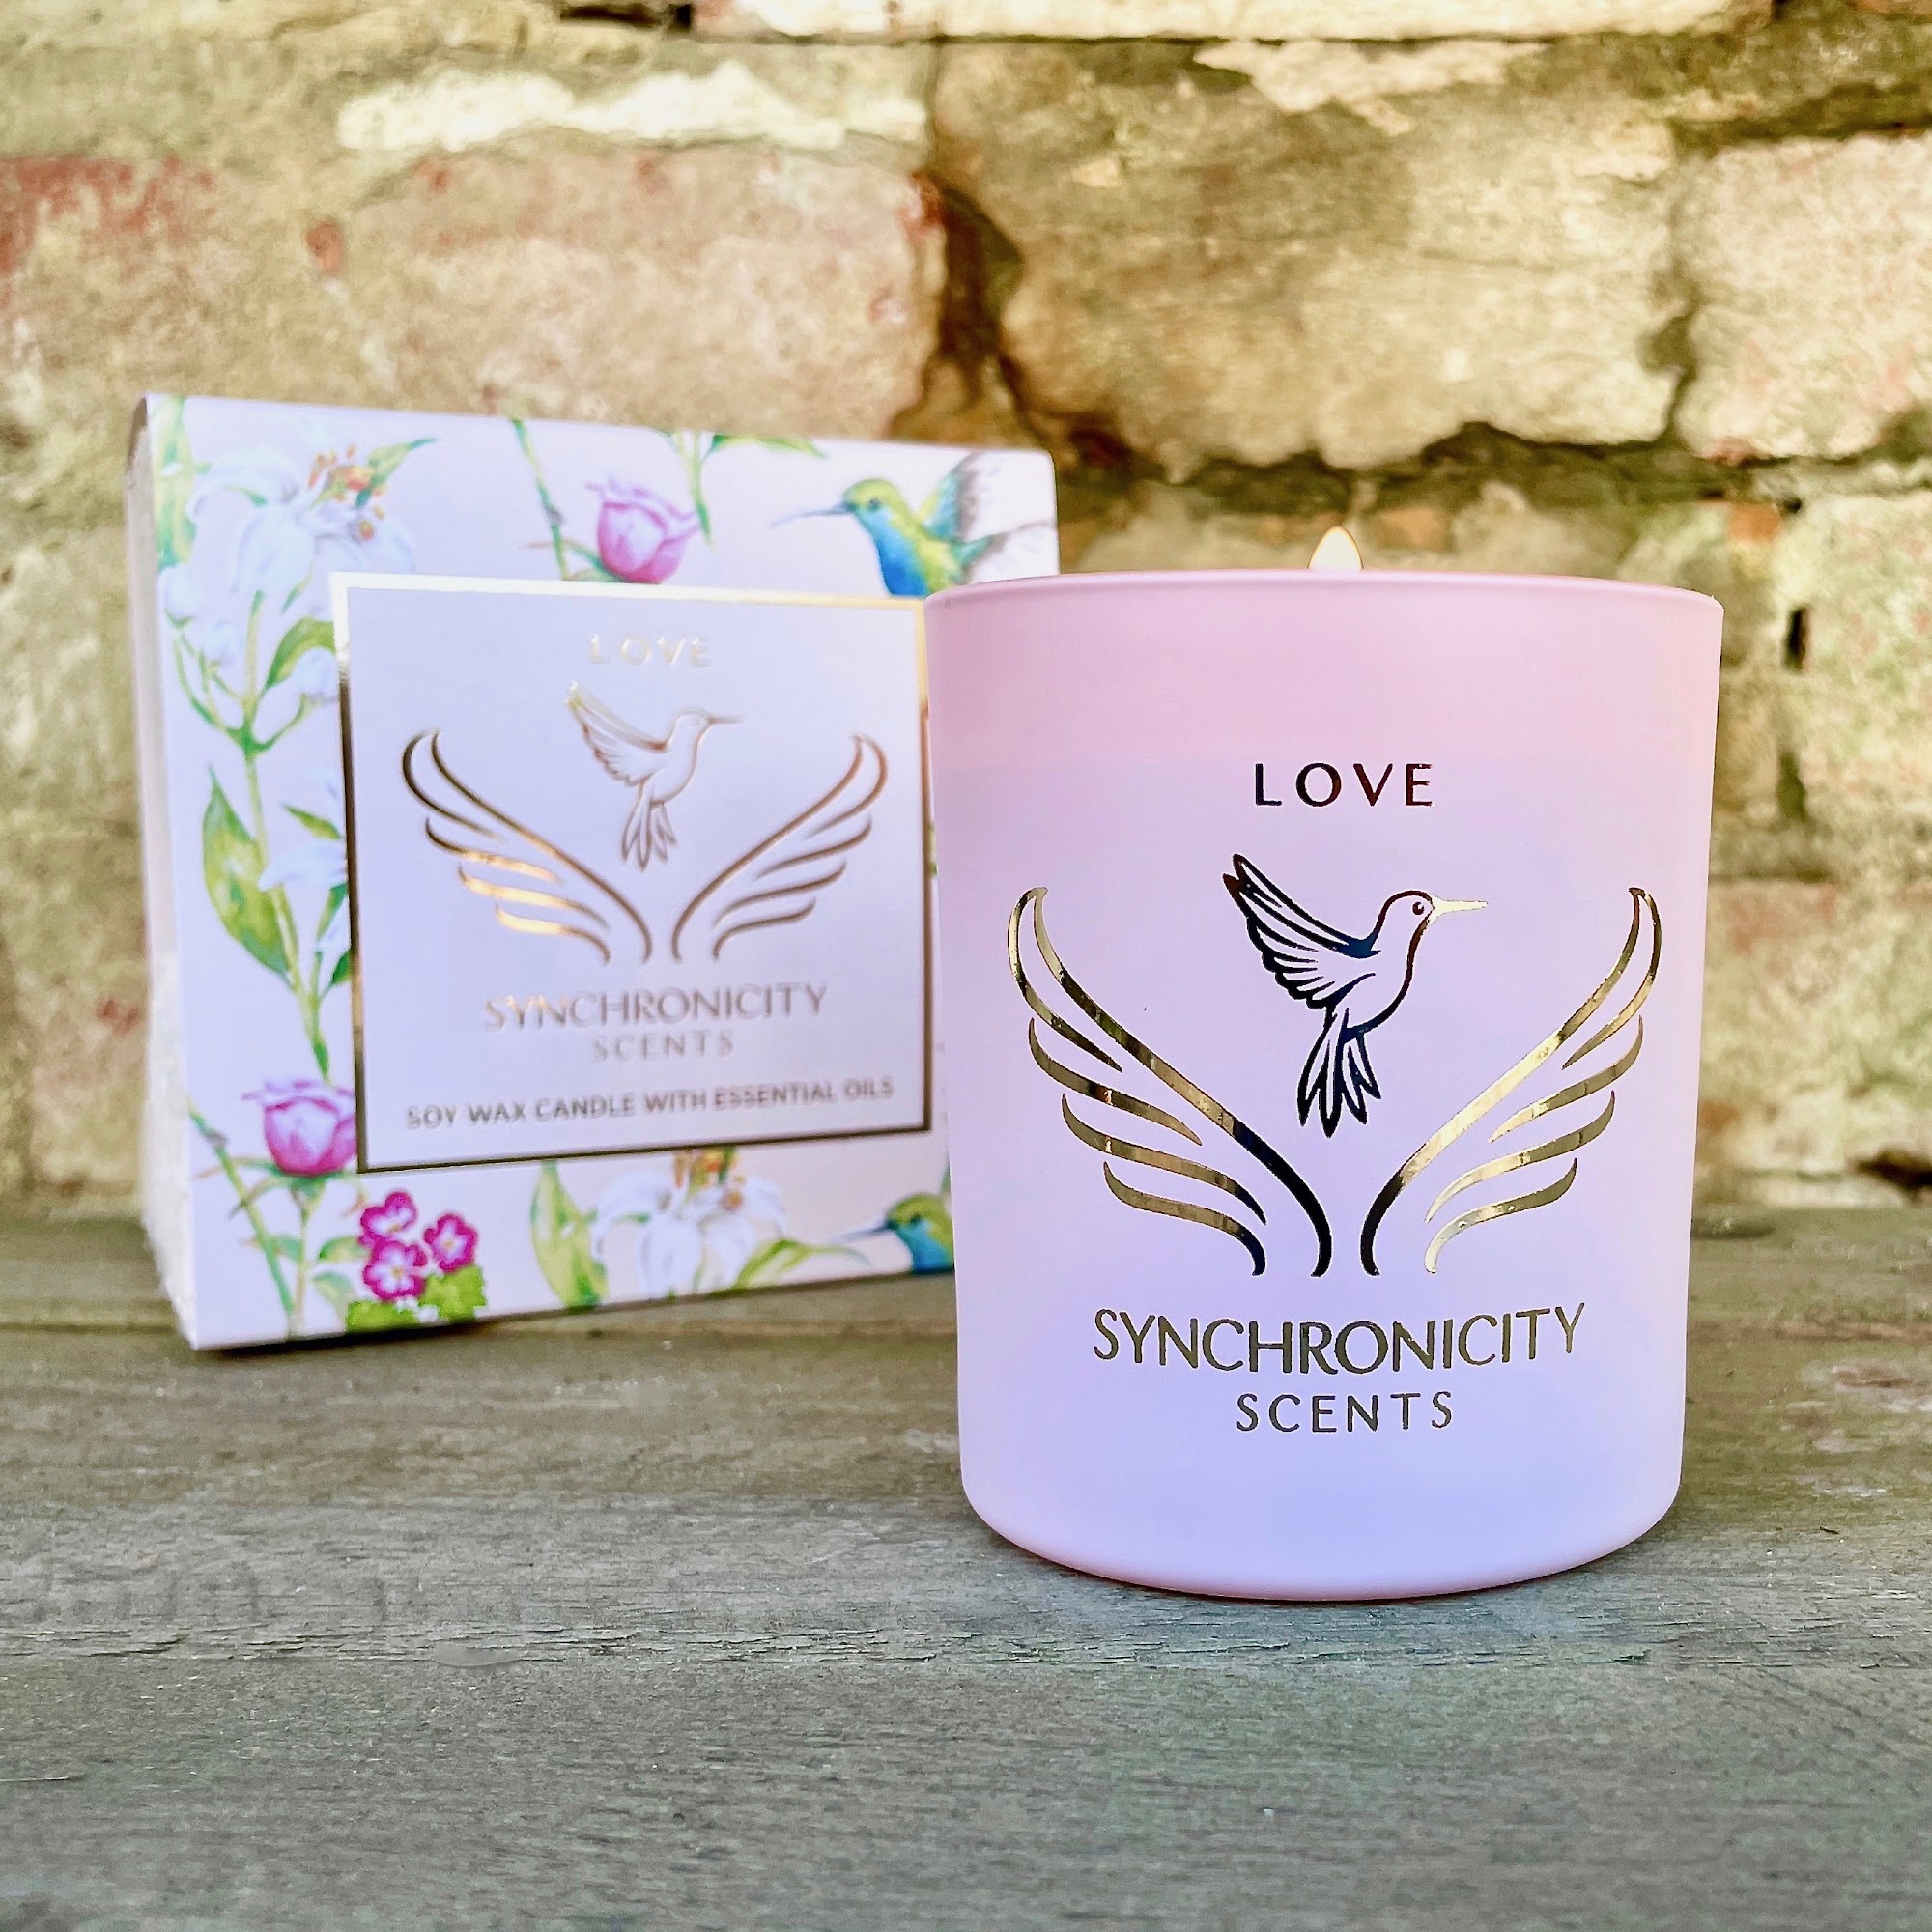 Synchronicity Scents' Love candle